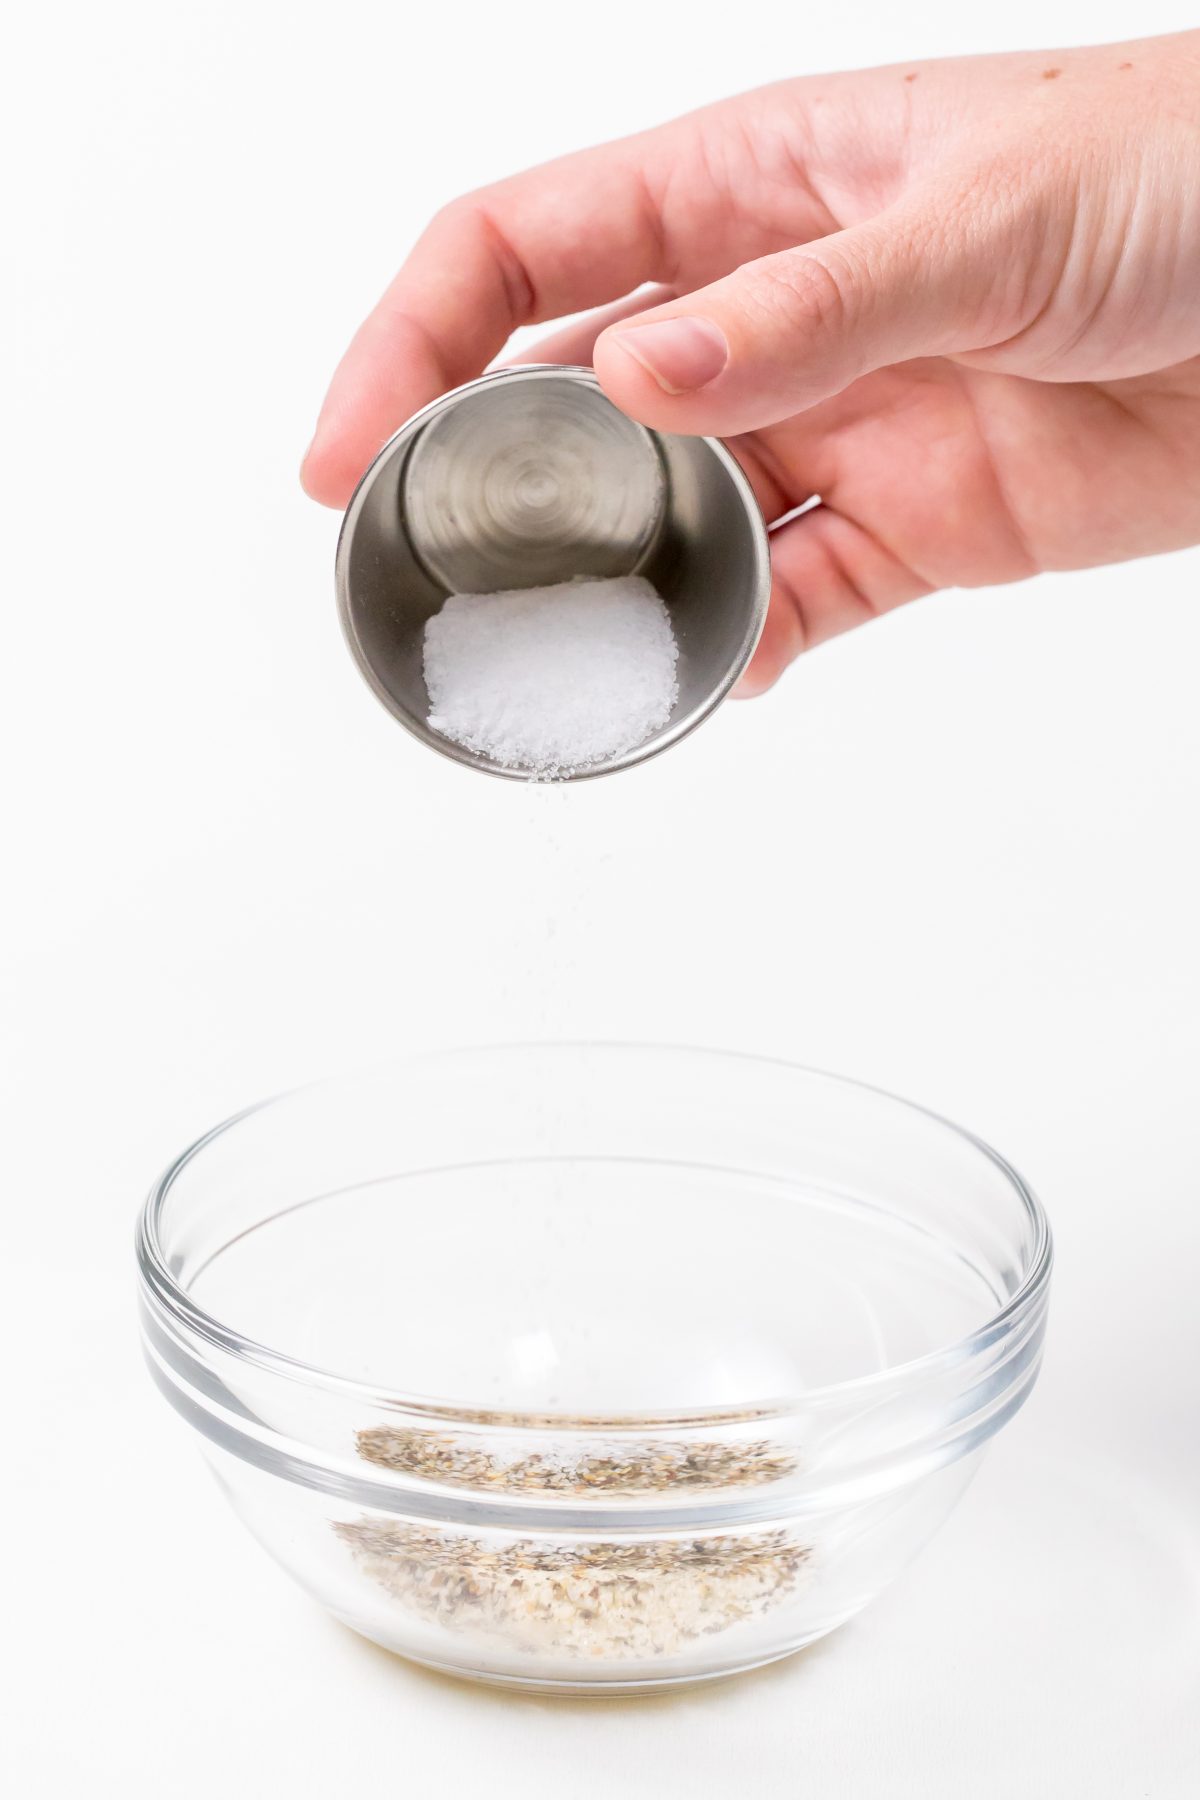 Salt being added to bowl